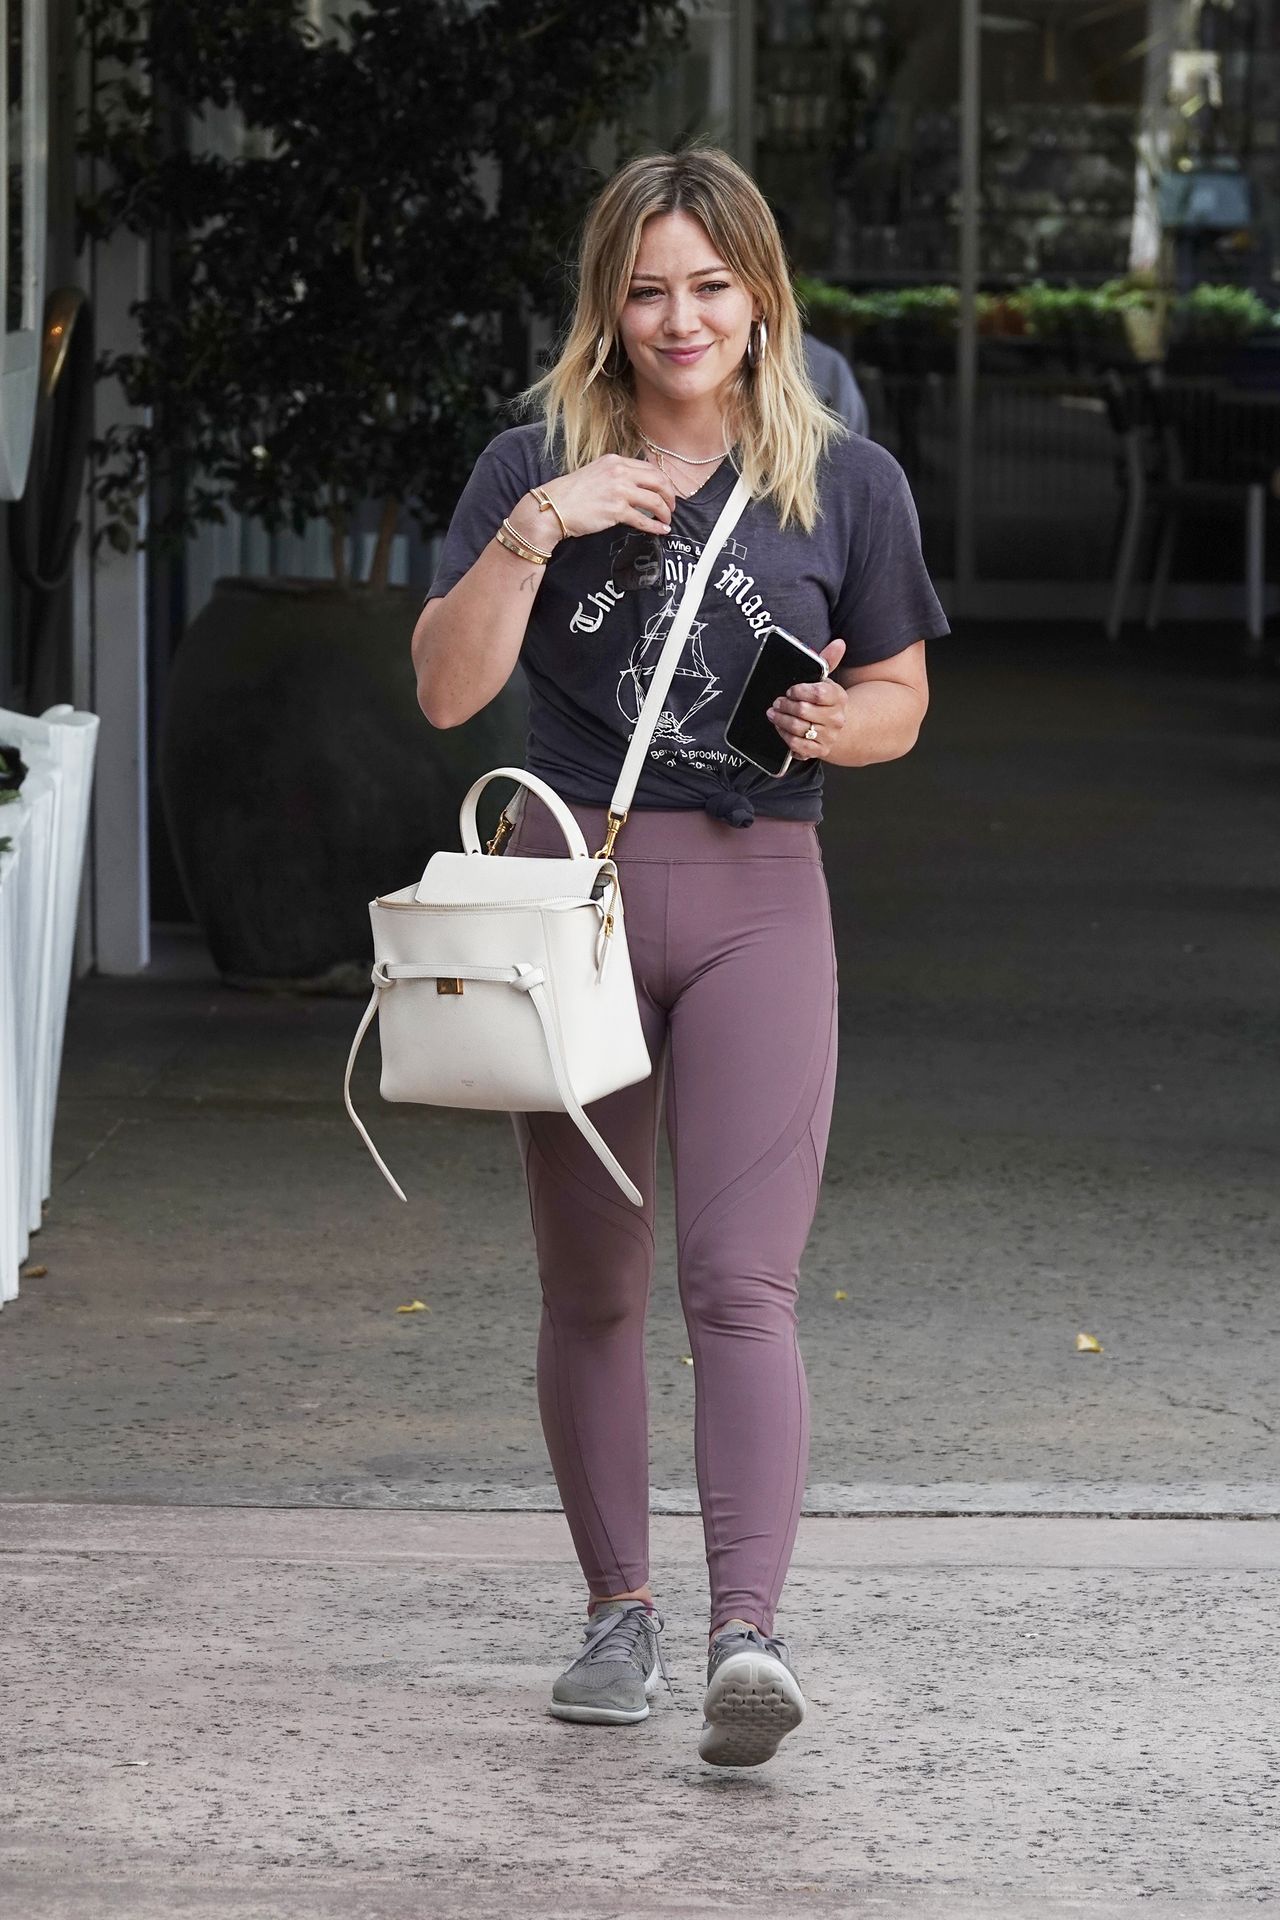 Hilary Duff in Tights - Switch Boutique in Bel-Air 09/09/2019.